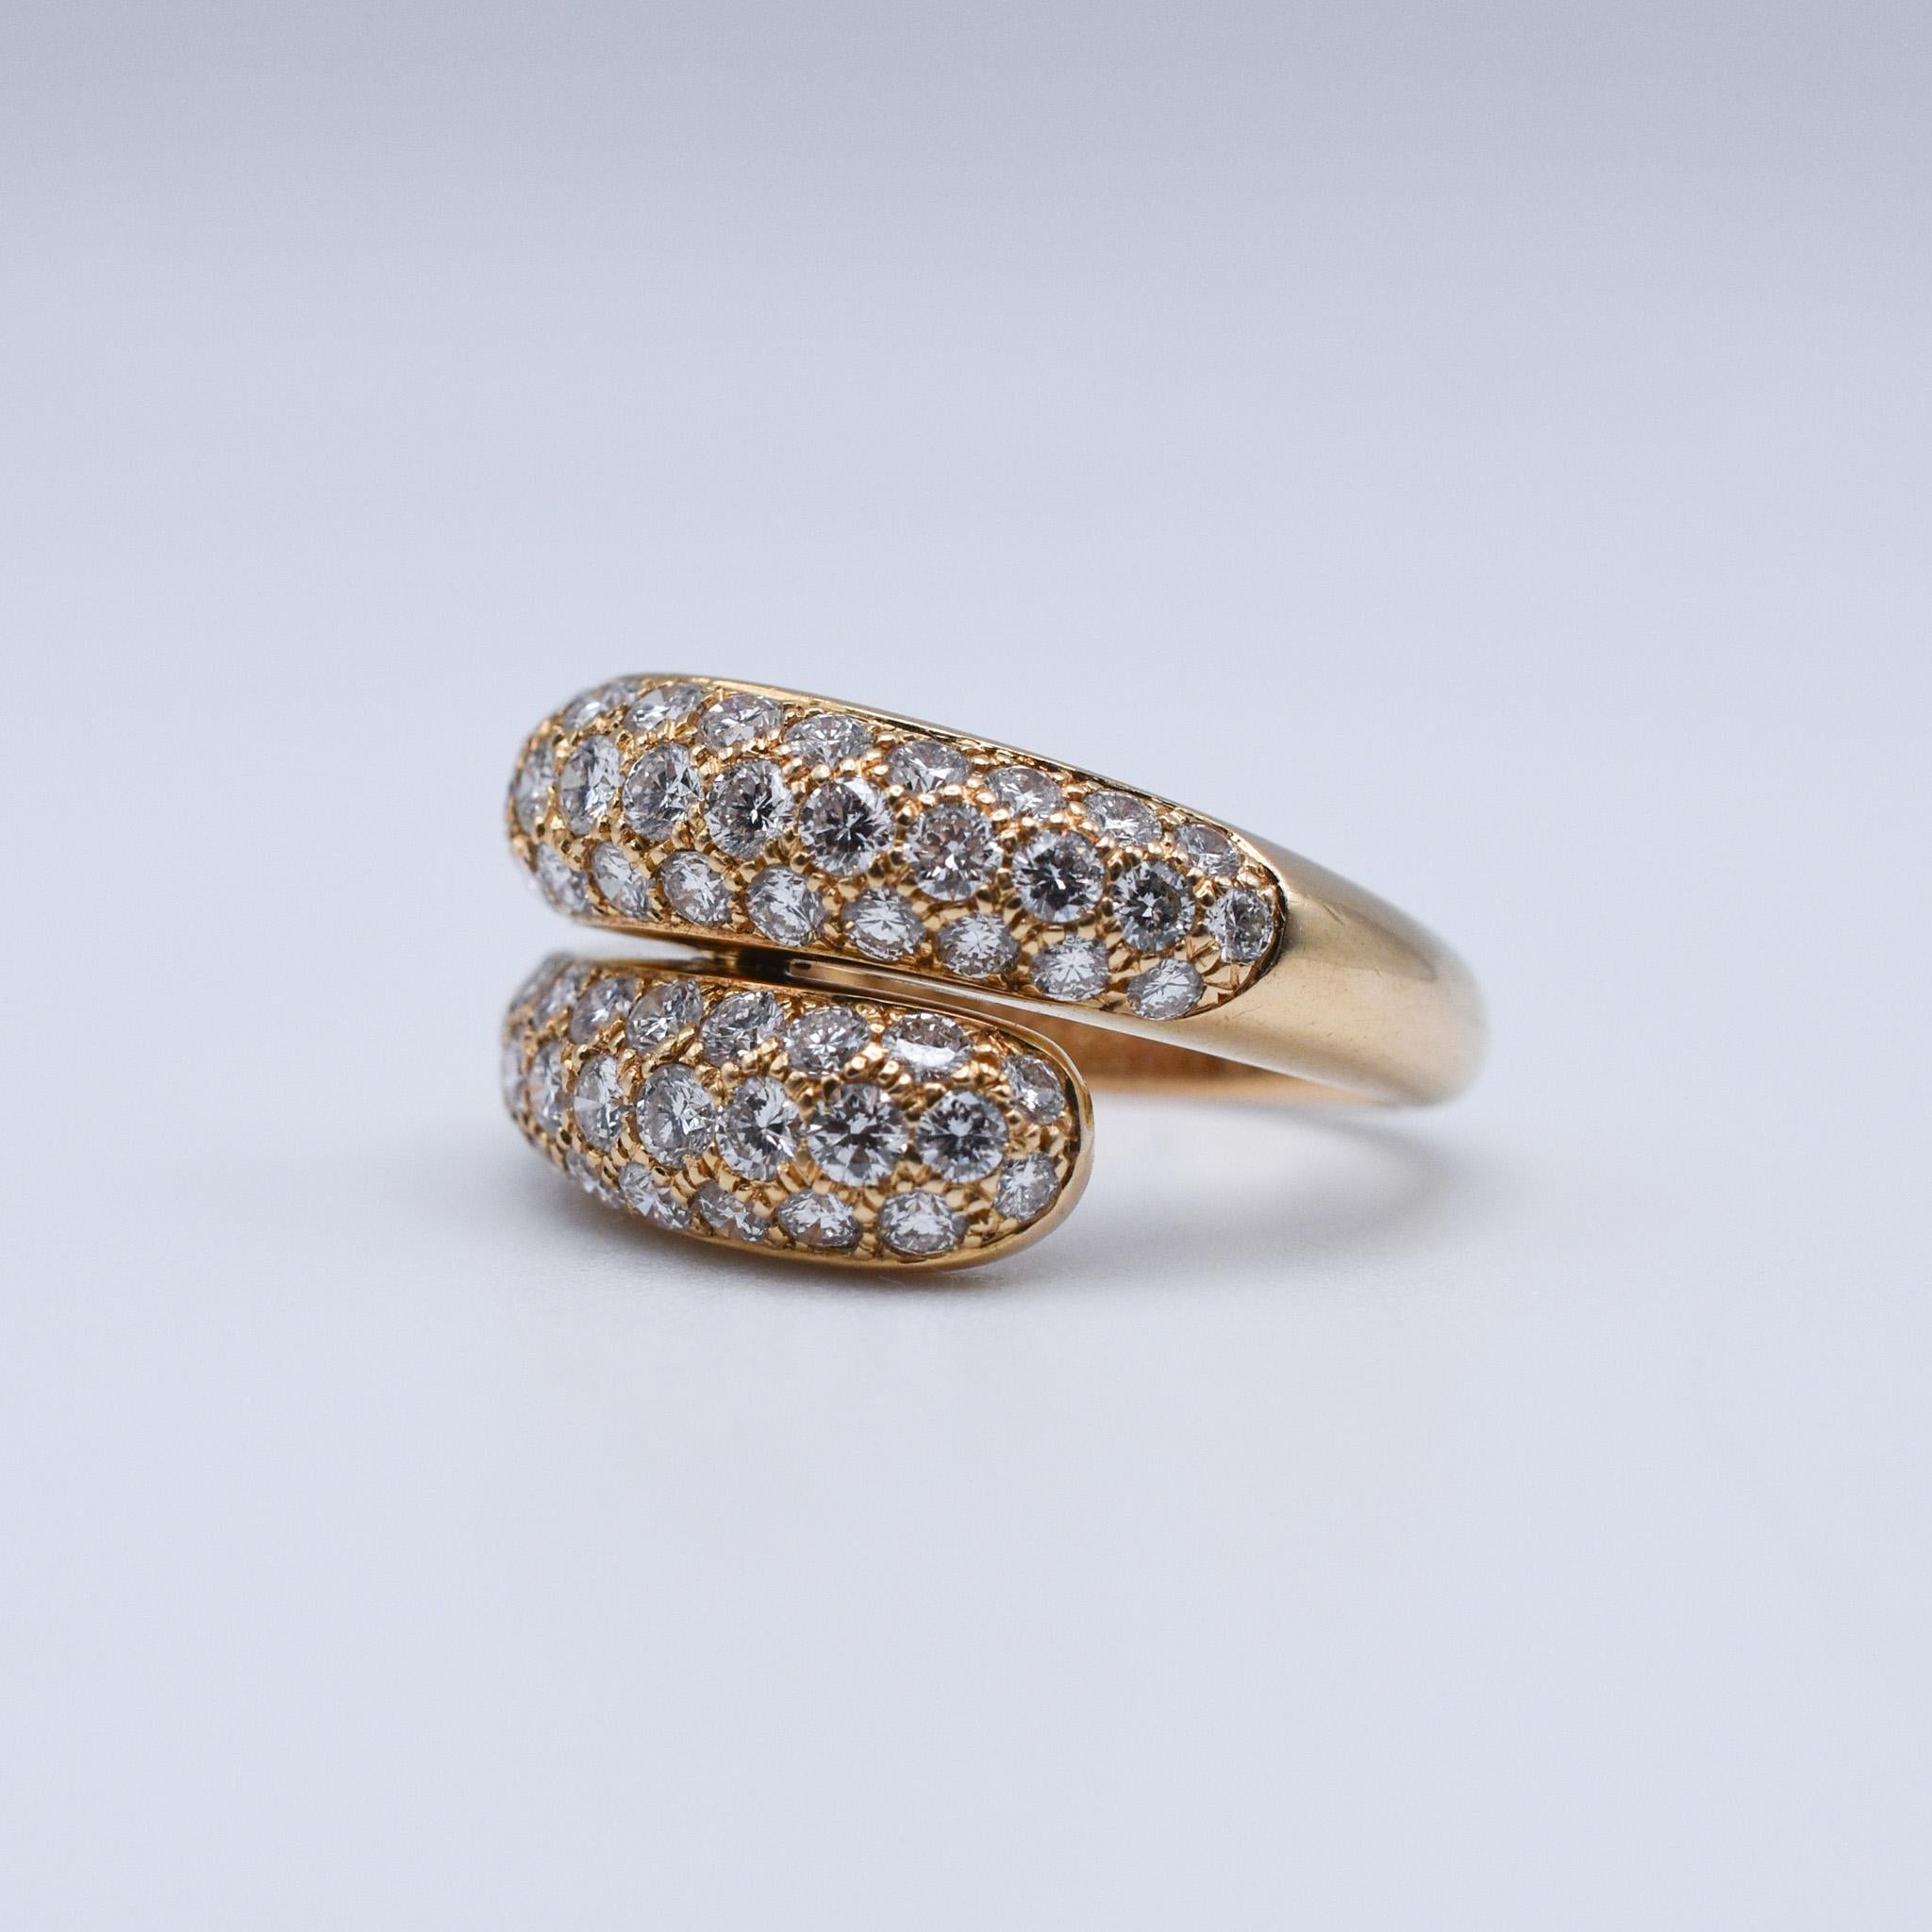 An elegant Cartier Diamond Bypass Ring, showcasing 1.50ct of pavé-set brilliant cut diamonds mounted on 18k yellow gold. Made in Paris, circa 1990.

Ring size: US 6.25